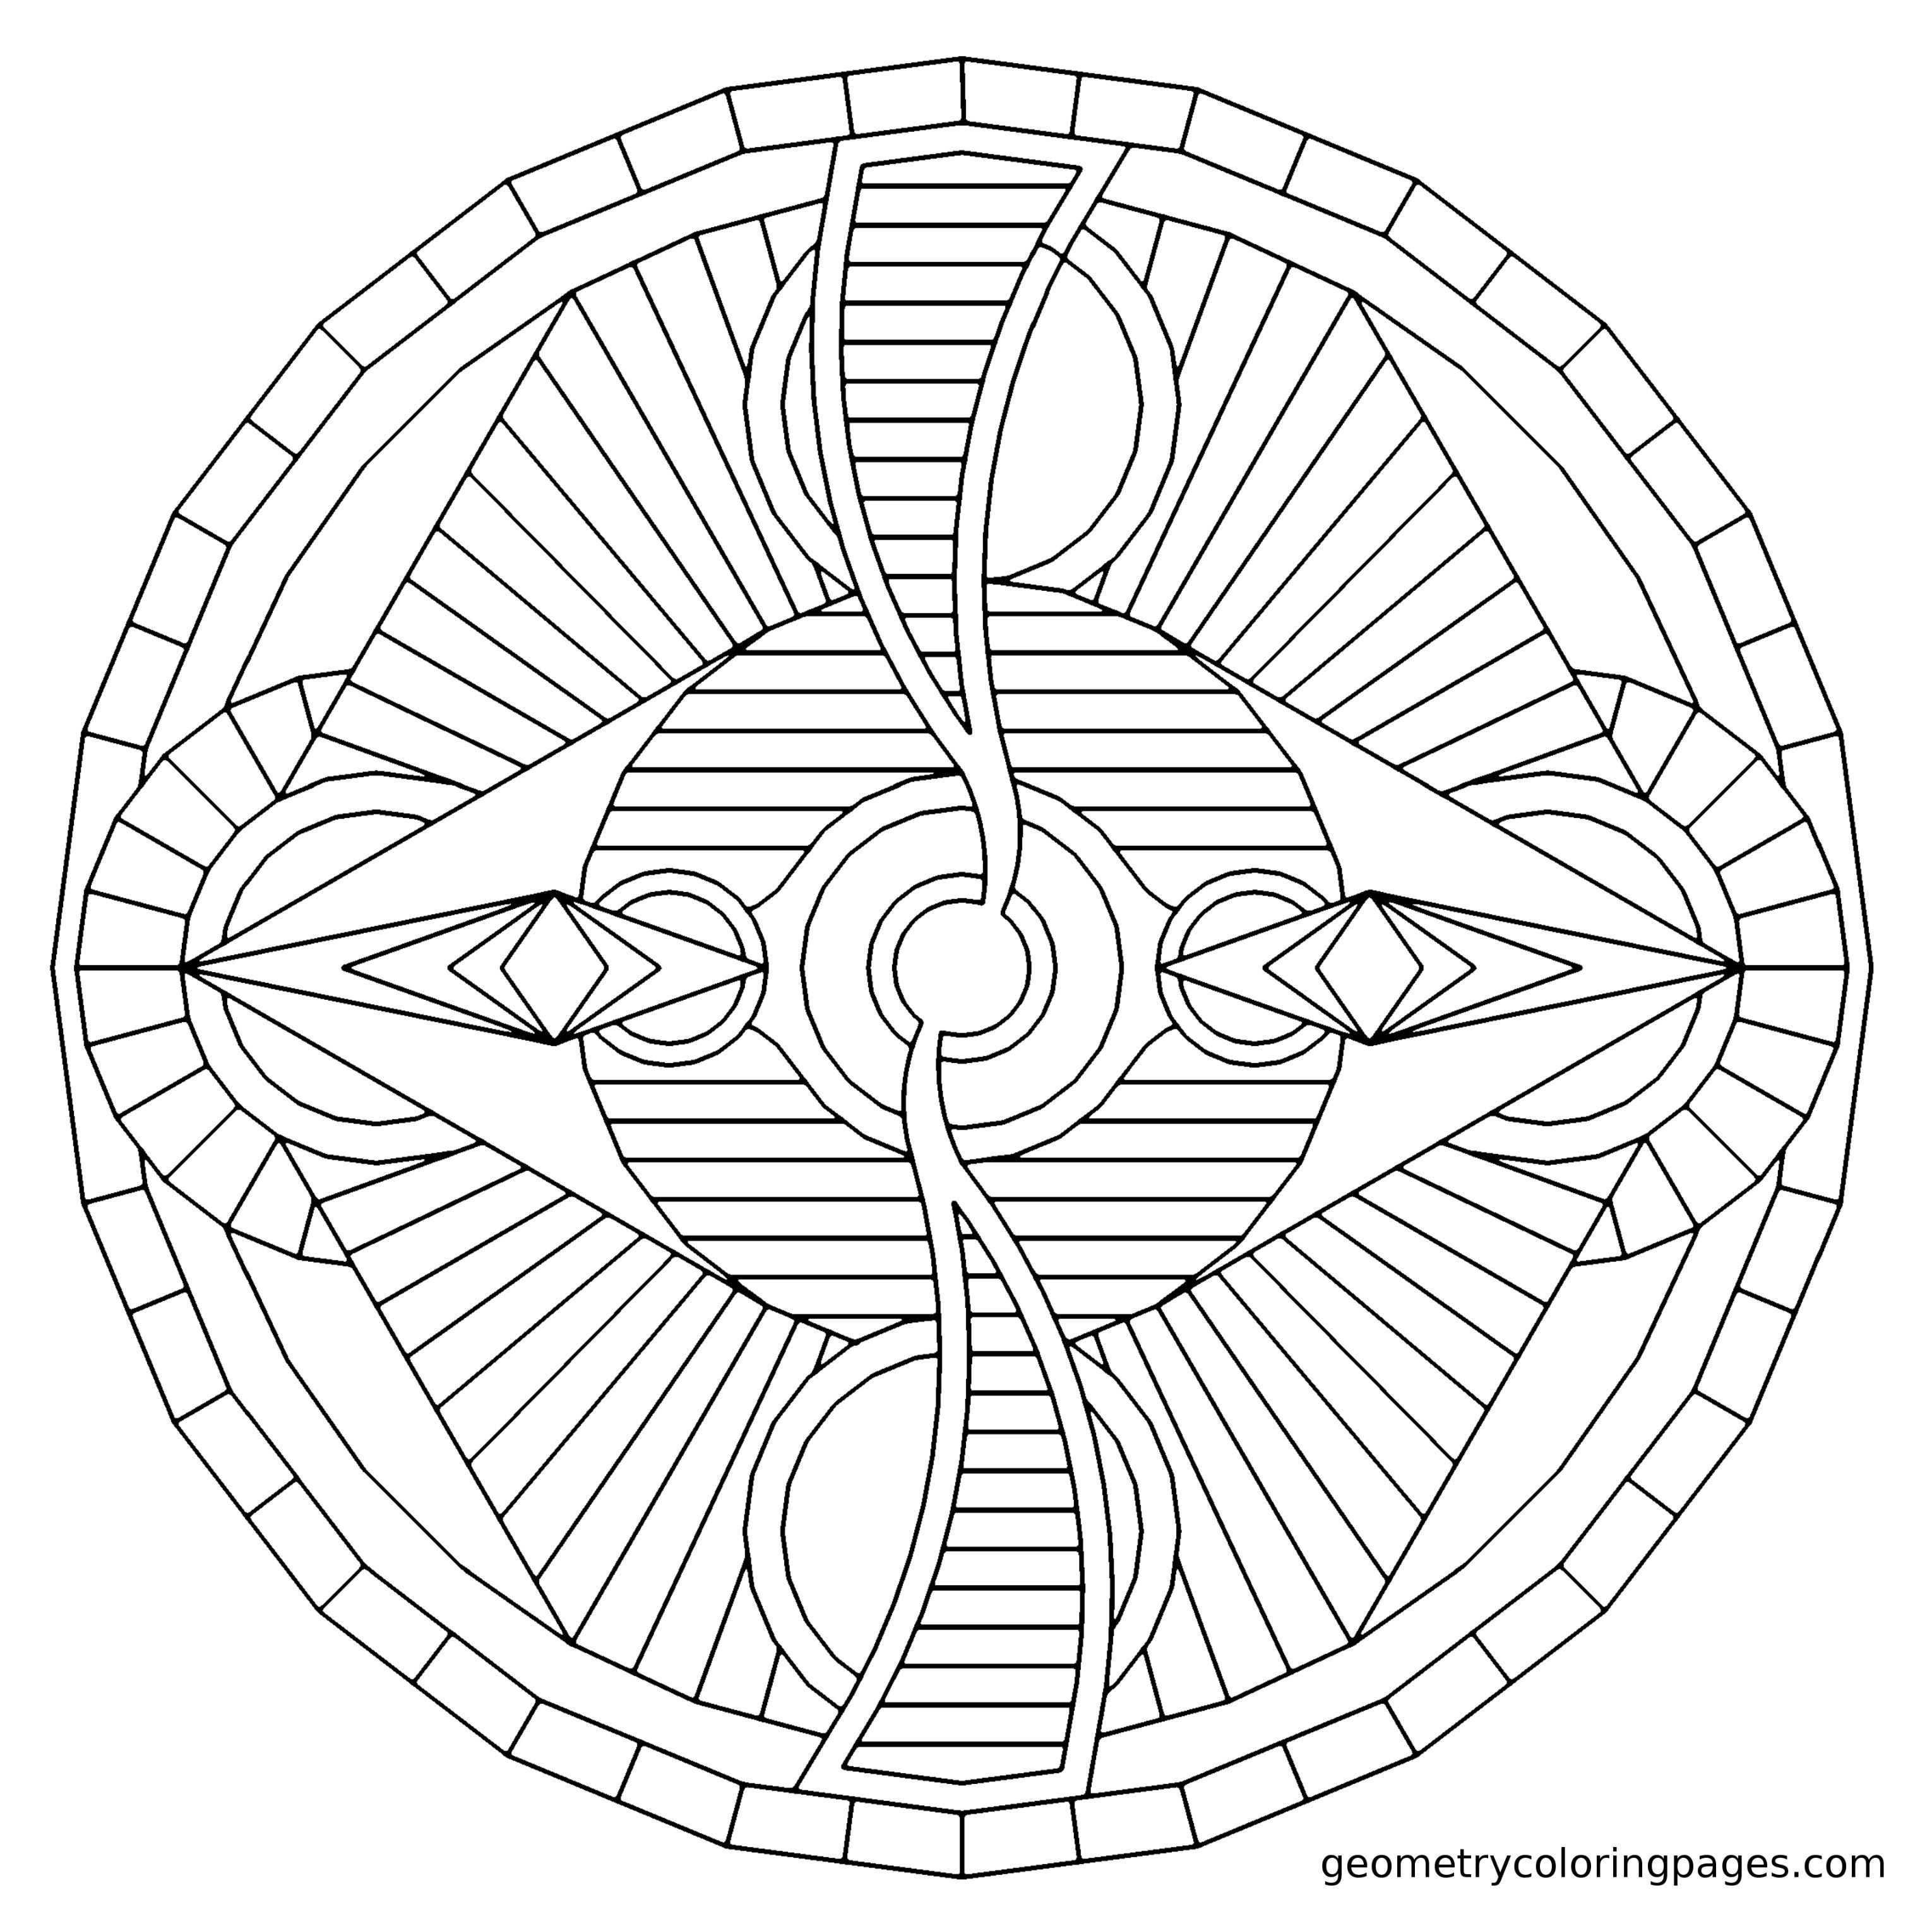 330 Simple Free Sacred Geometry Coloring Pages with disney character